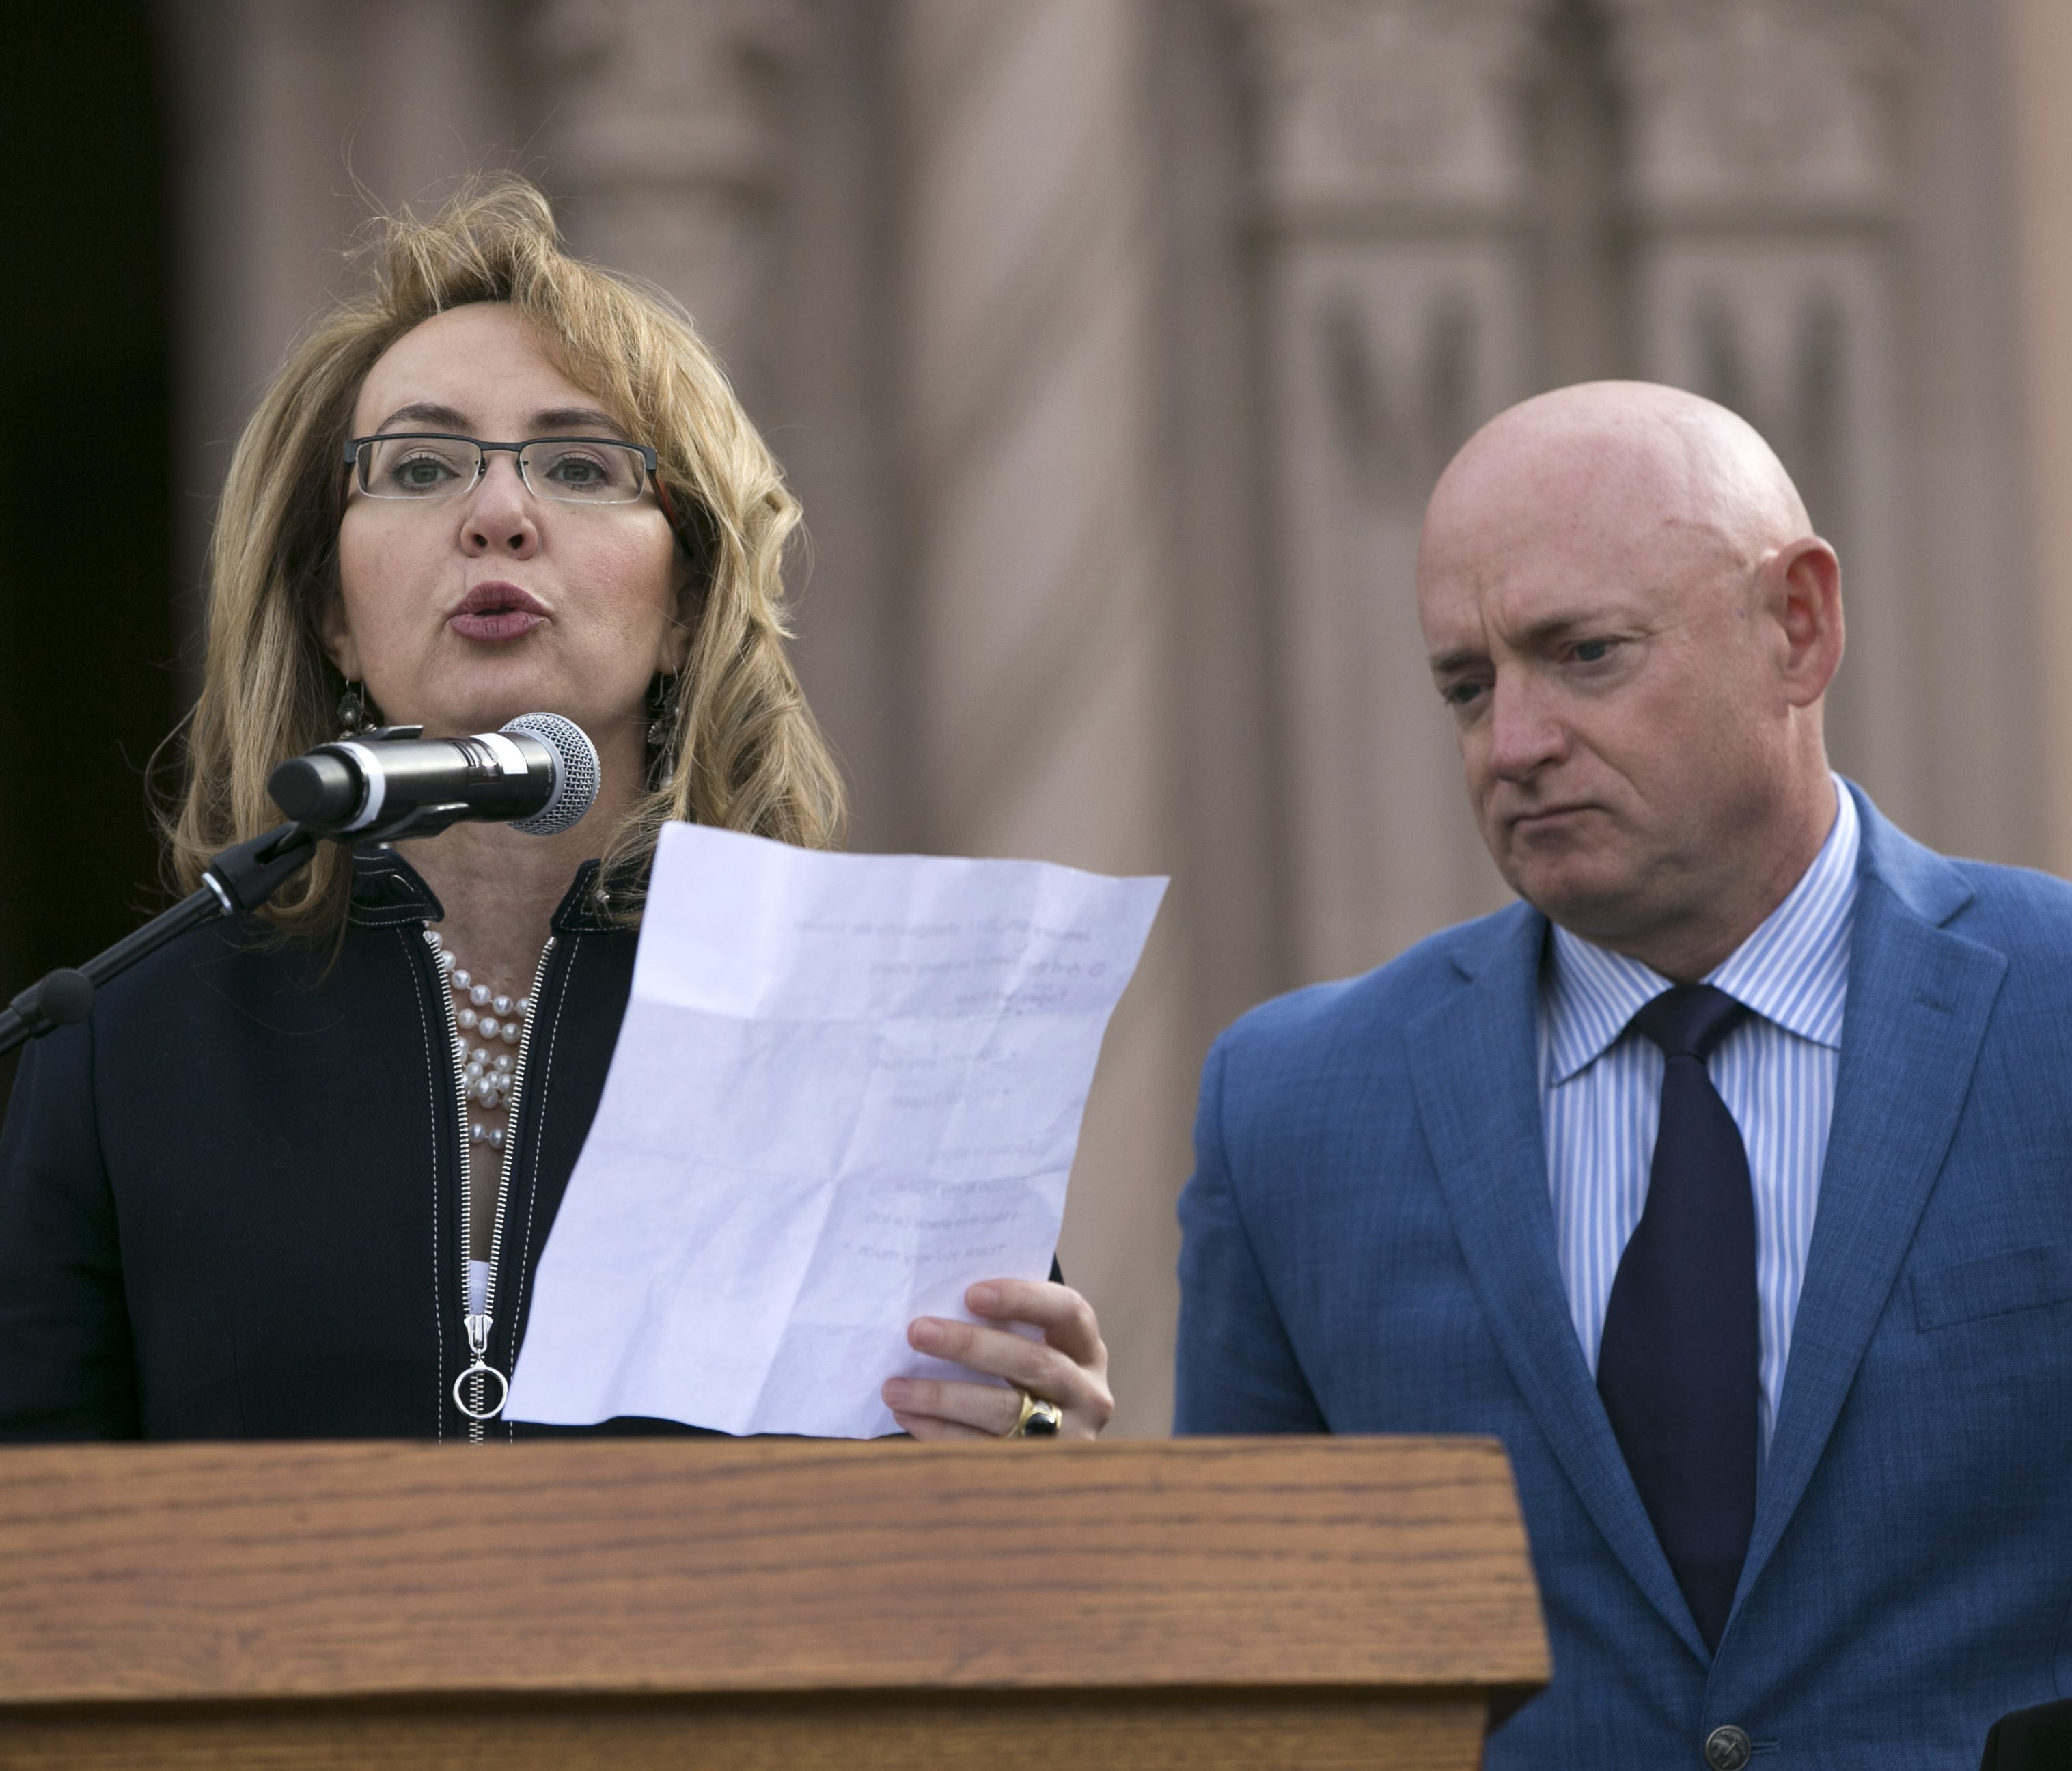 Former  U.S. Rep. Gabrielle Giffords speaks, as her husband, Mark Kelly looks on, during the memorial dedication for Tucson's January 8th Memorial at El Presidio Park in Tucson on Jan. 8, 2018. The dedication was held on the seven-year anniversary of